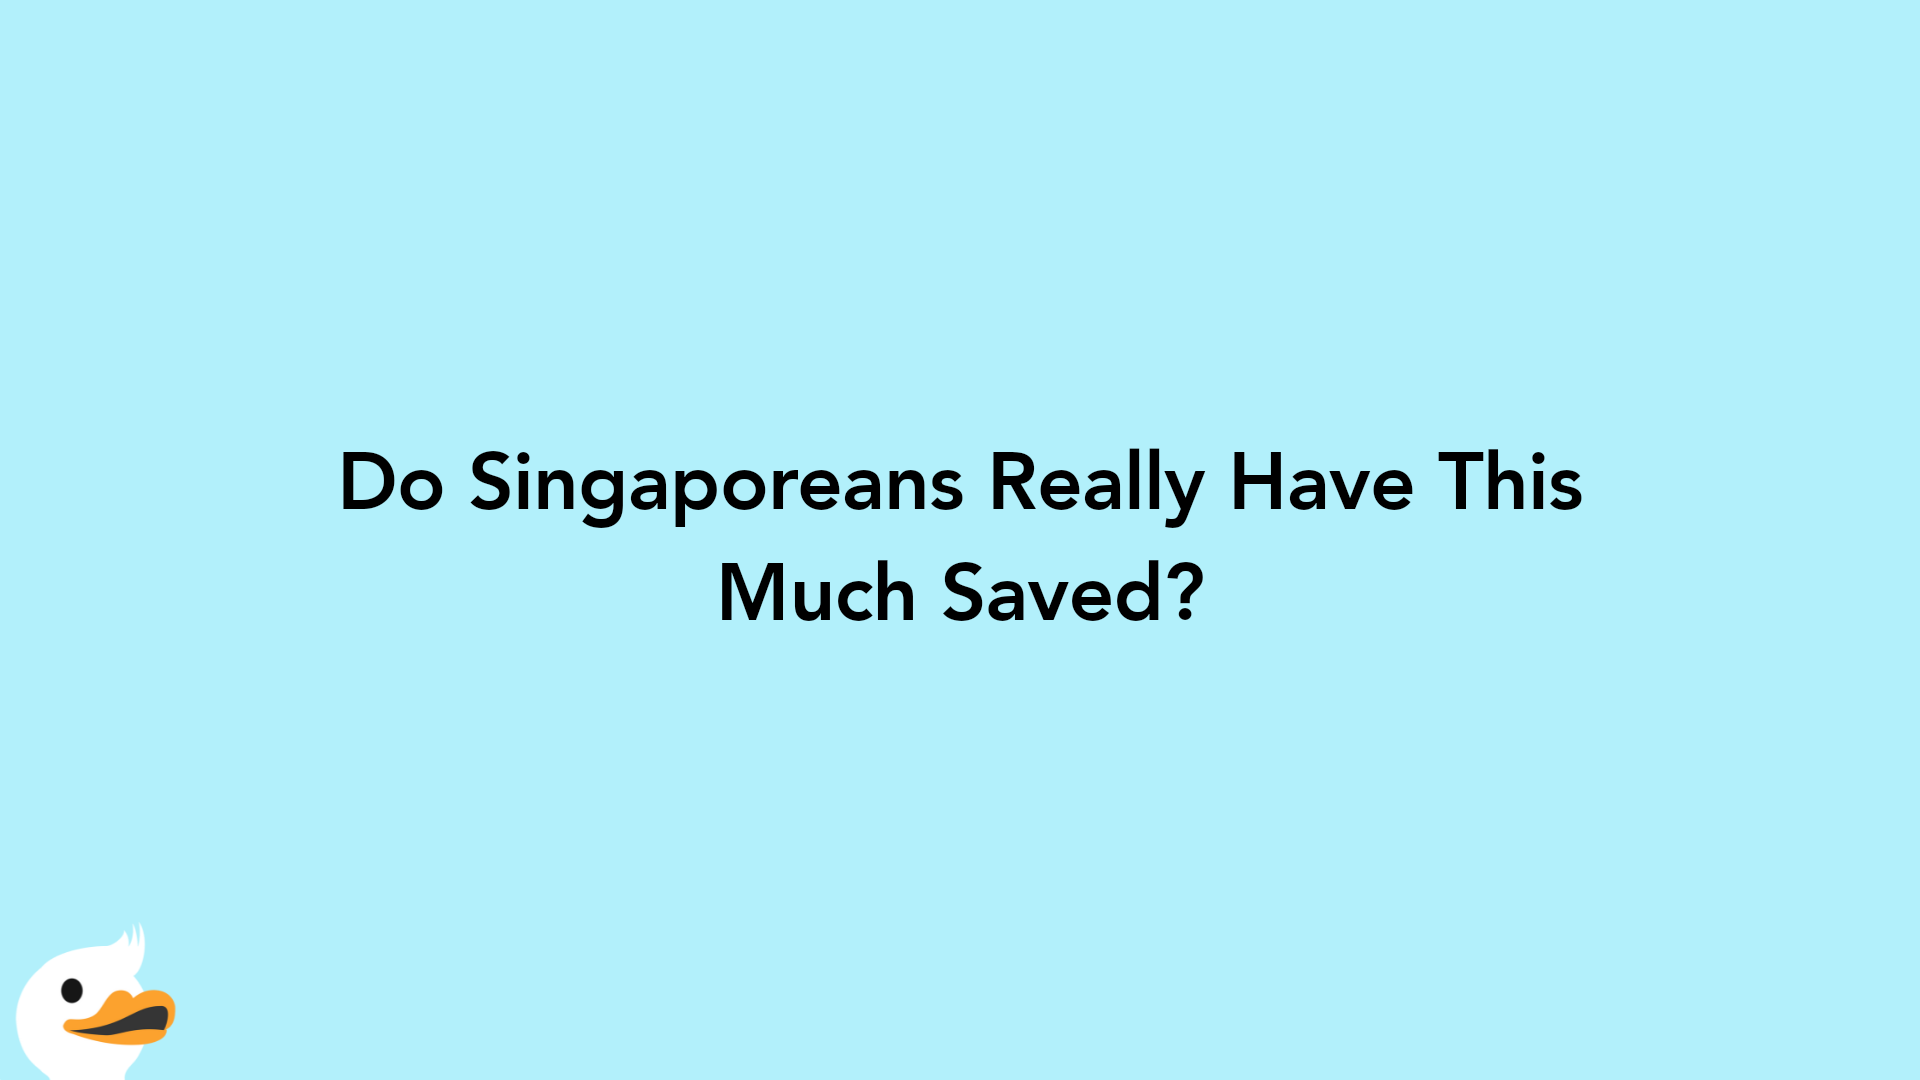 Do Singaporeans Really Have This Much Saved?